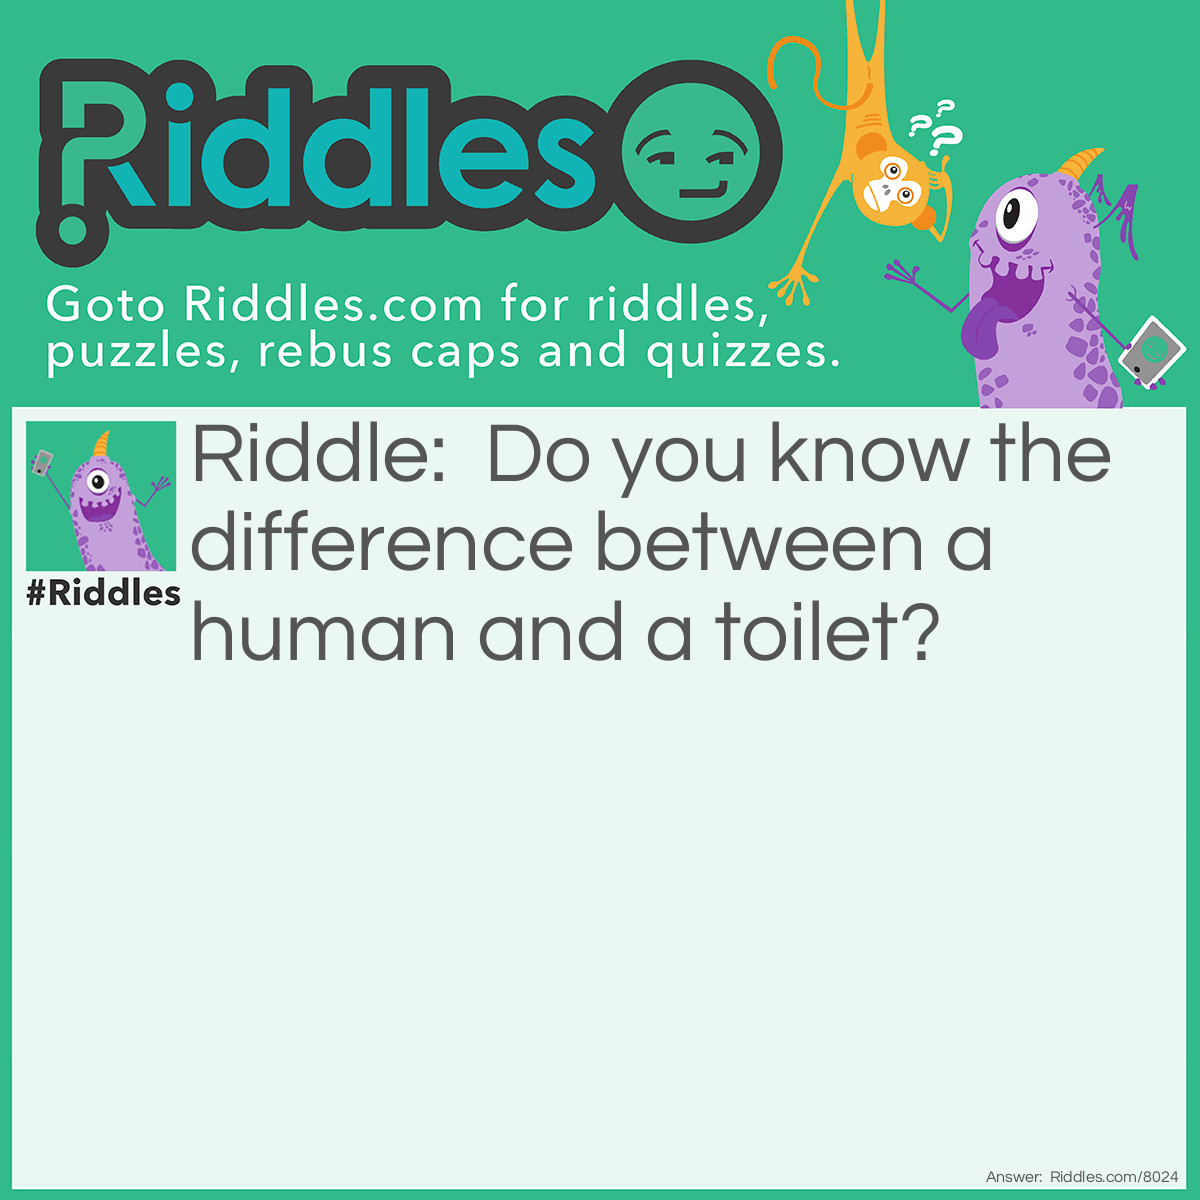 Riddle: Do you know the difference between a human and a toilet? Answer: Neither does R. Kelly. not my joke